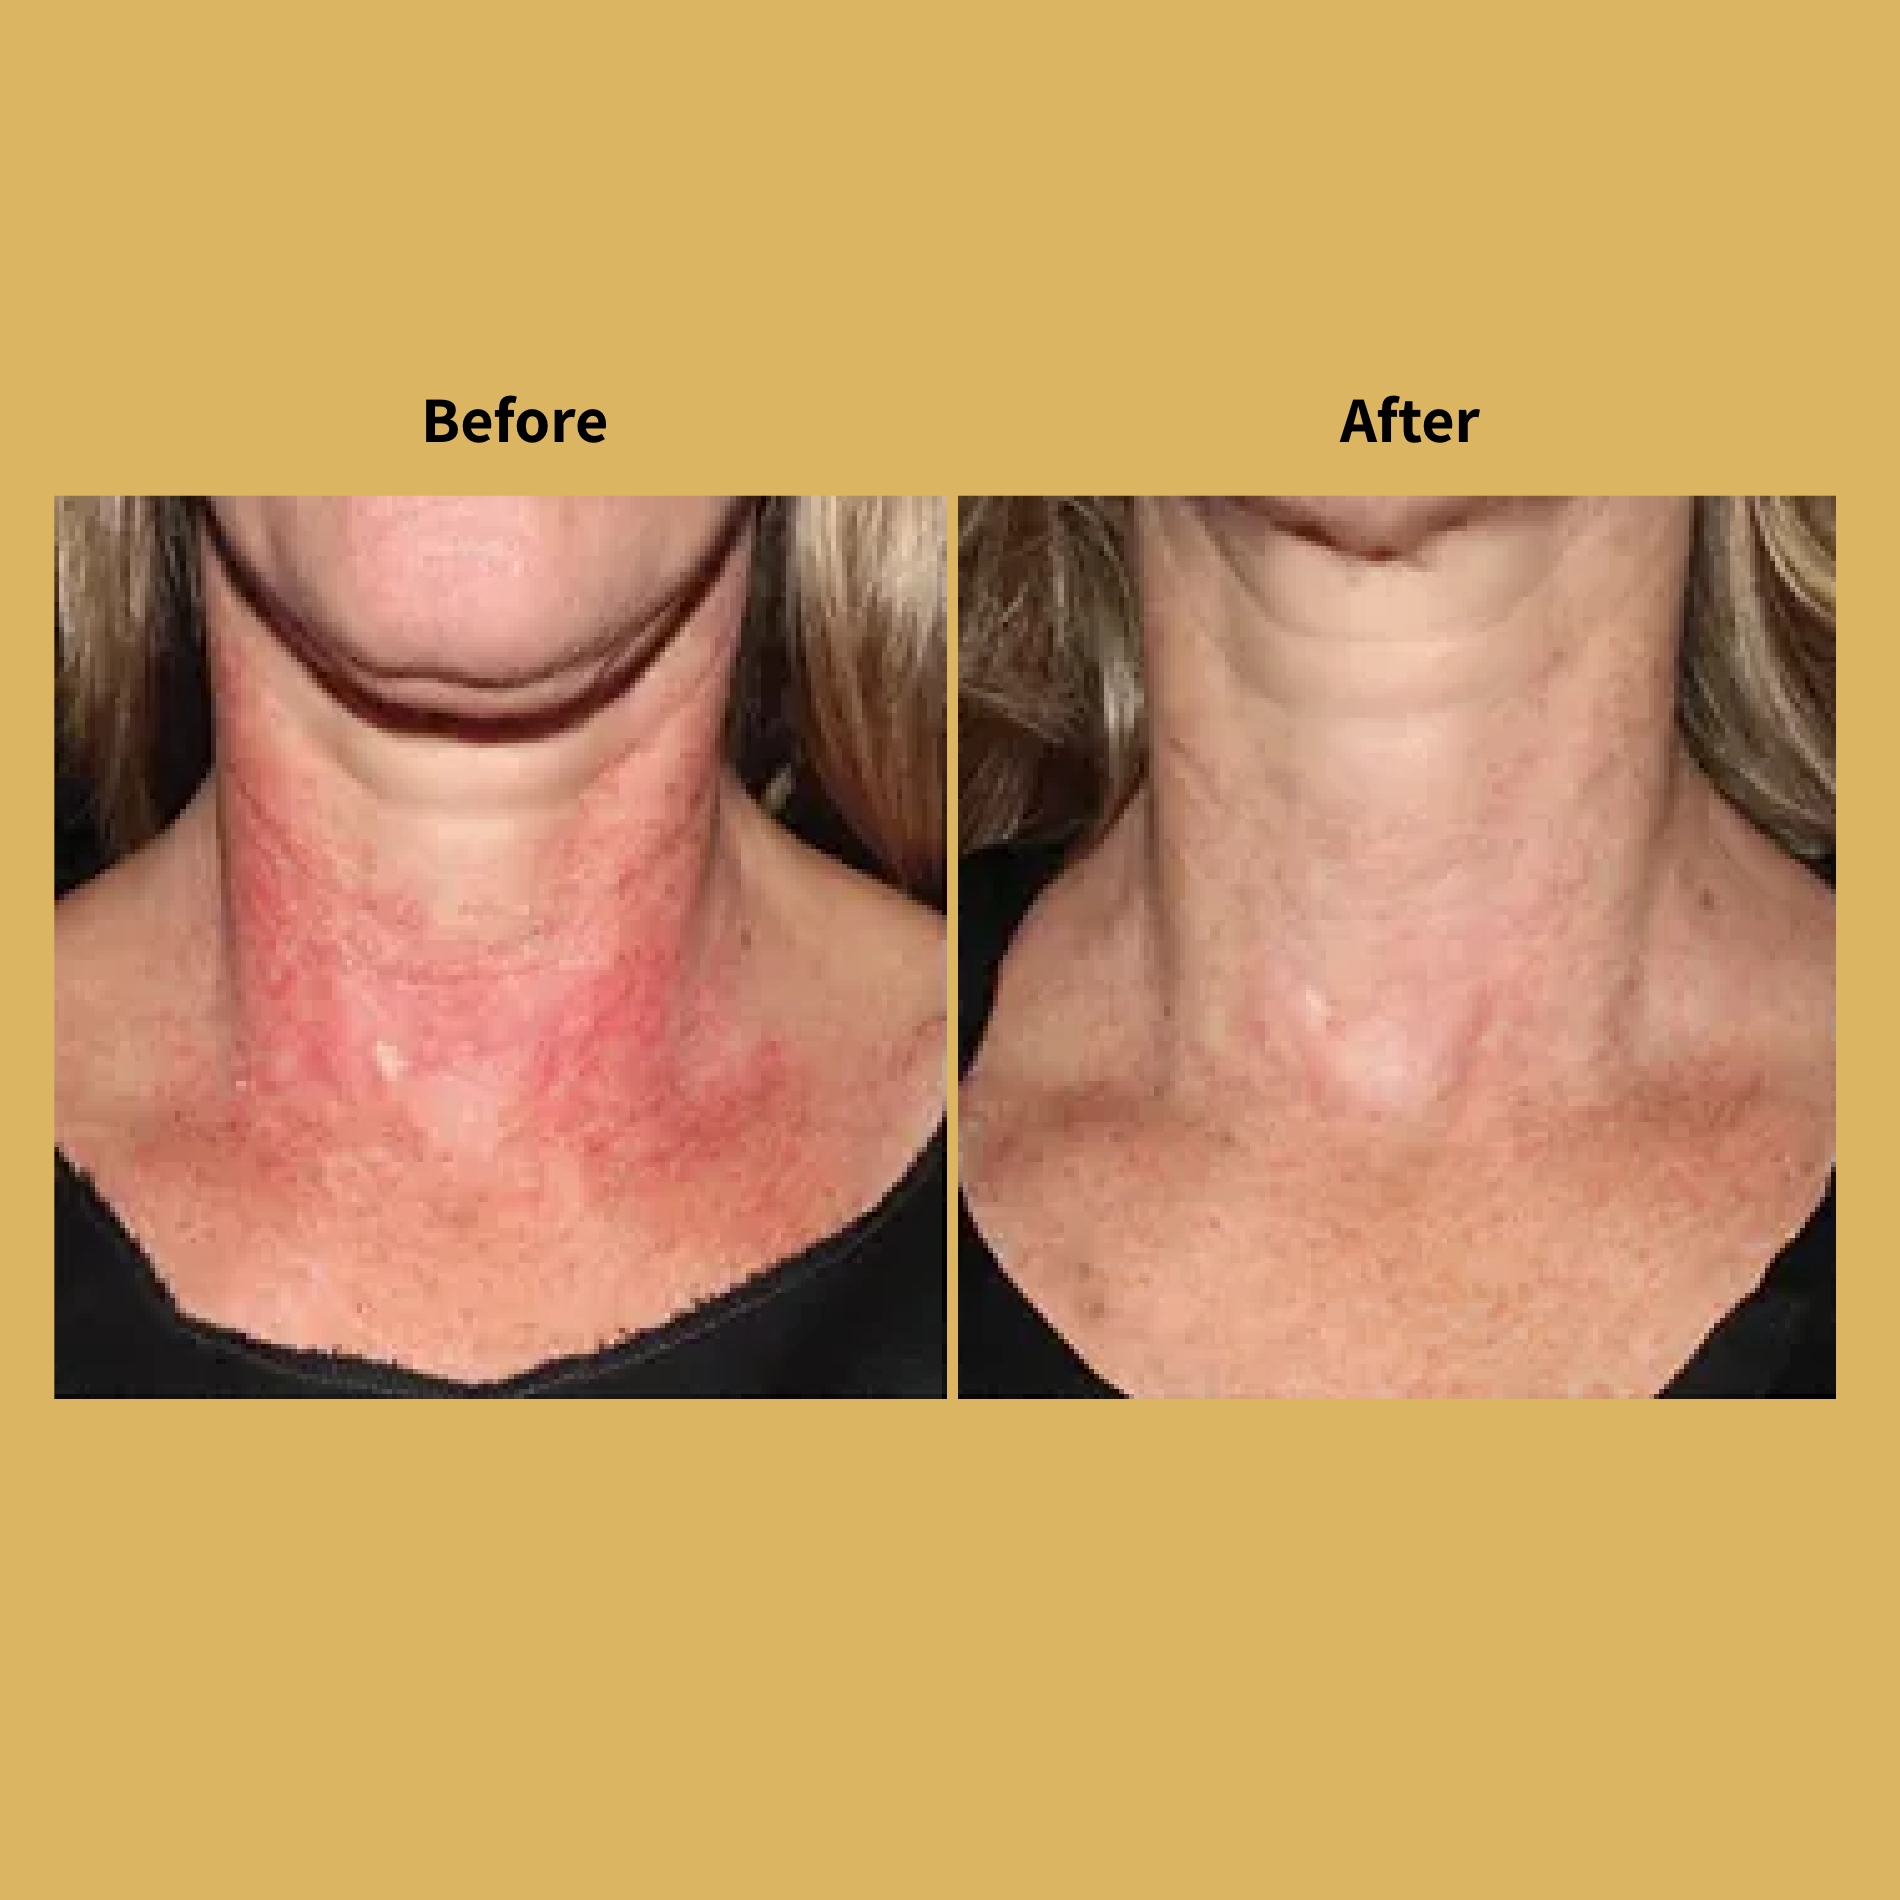 Laser Rejuvenation Before and After Treatment Photos | Soleil Medical & Beauty Spa in Portland, OR